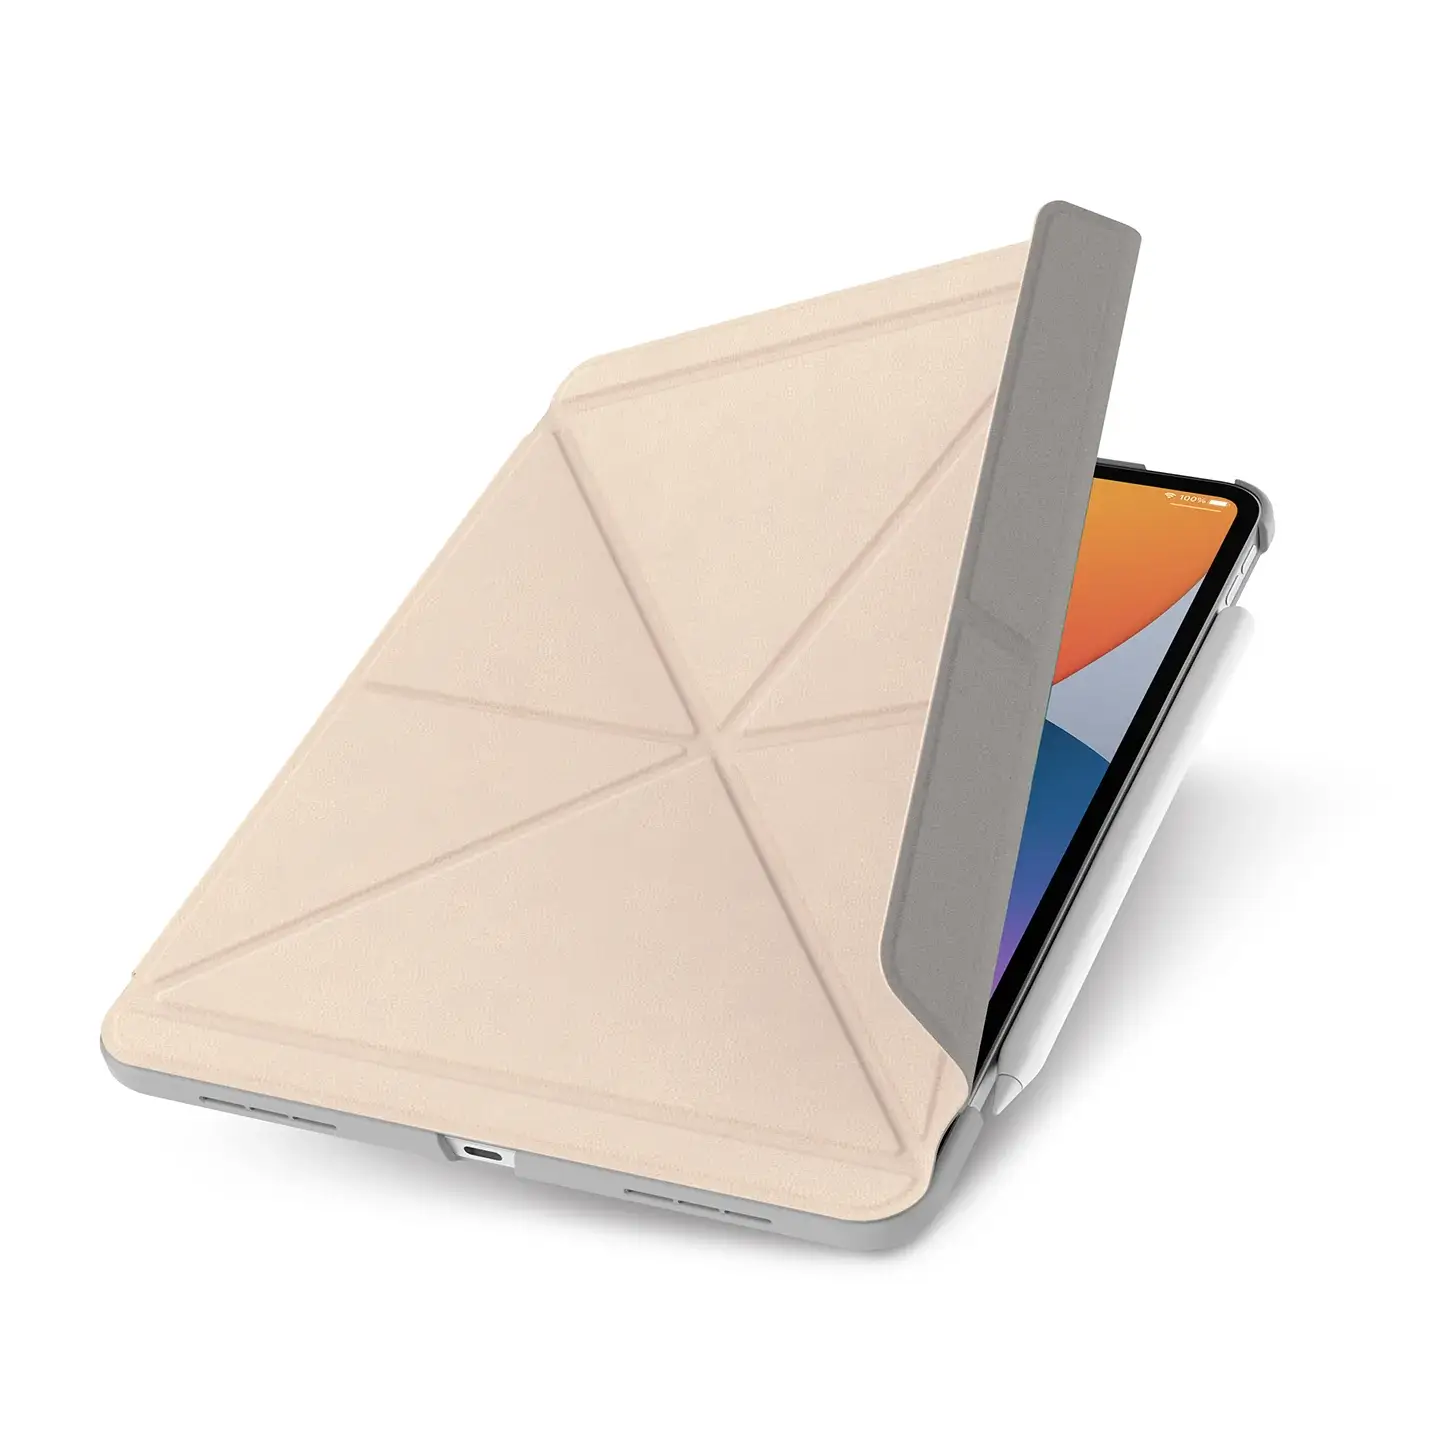 Moshi VersaCover Case with Folding Cover Savanna Beige for iPad Pro 11" (4th/1st Gen) (99MO231602)